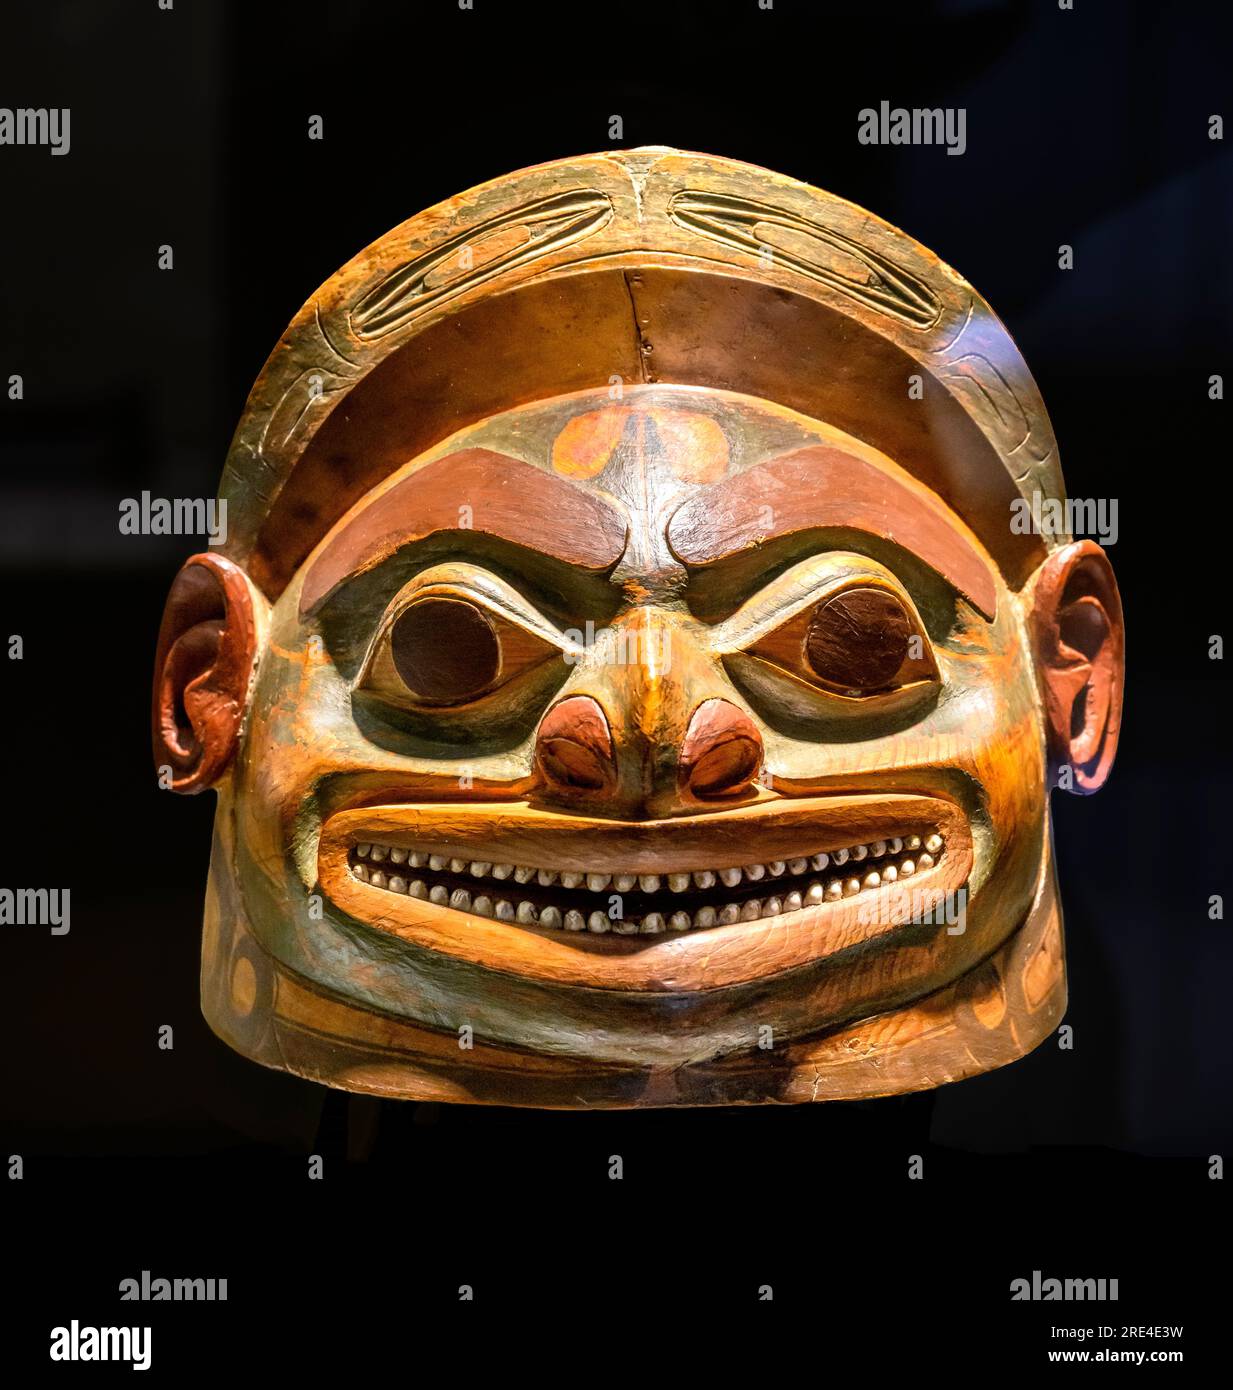 Helmet  with a carved representation of a face, made of wood, leather, shell and copper. Tlingit Indians, Northwest coast of North America. 18th centu Stock Photo